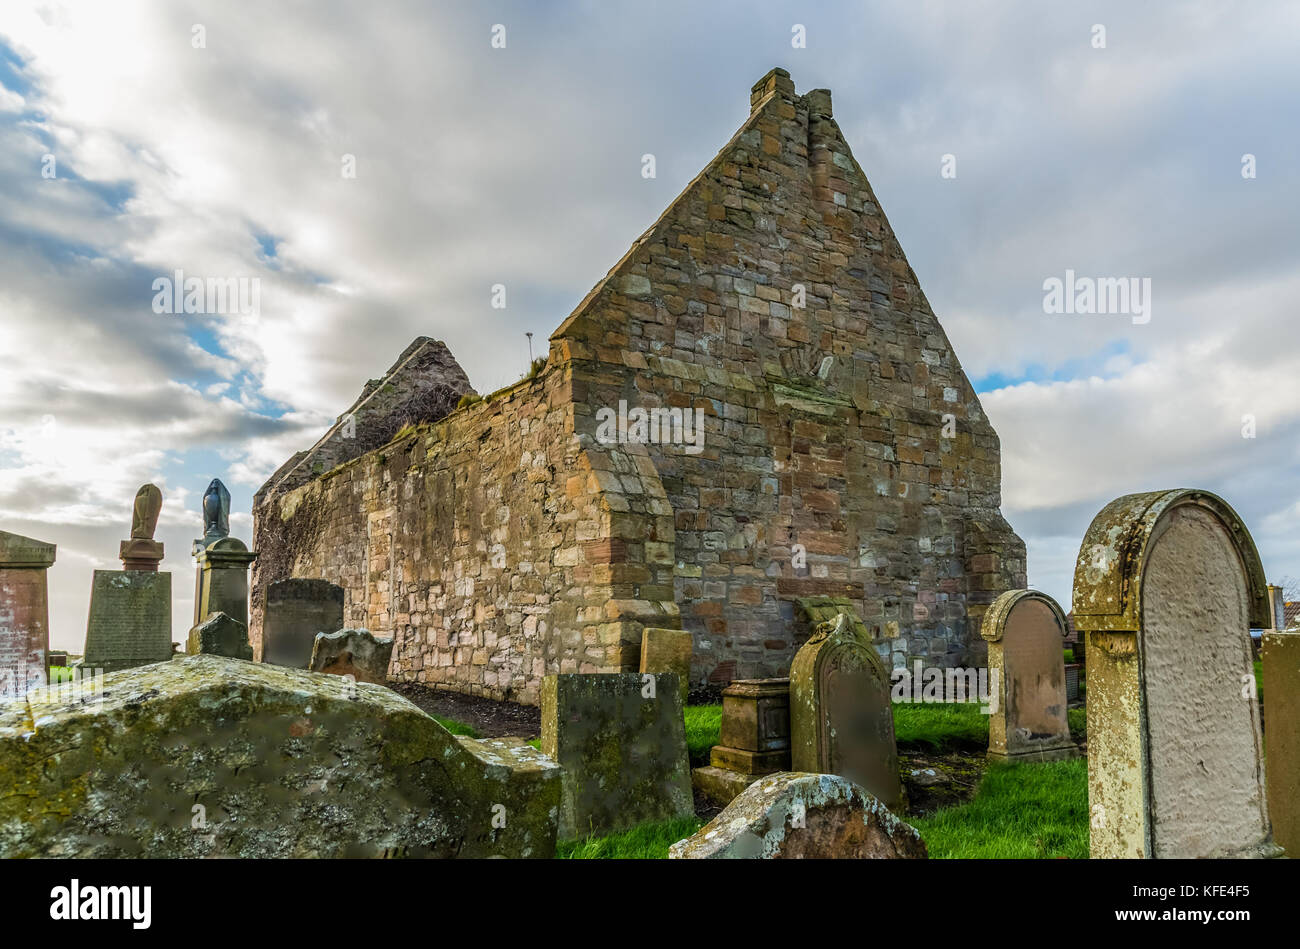 The Old Ruins of Prestwick Old Parish Church & Graveyard. Dedicated to St Nicholas surrounded by an old burial ground. In the church yard are the grav Stock Photo